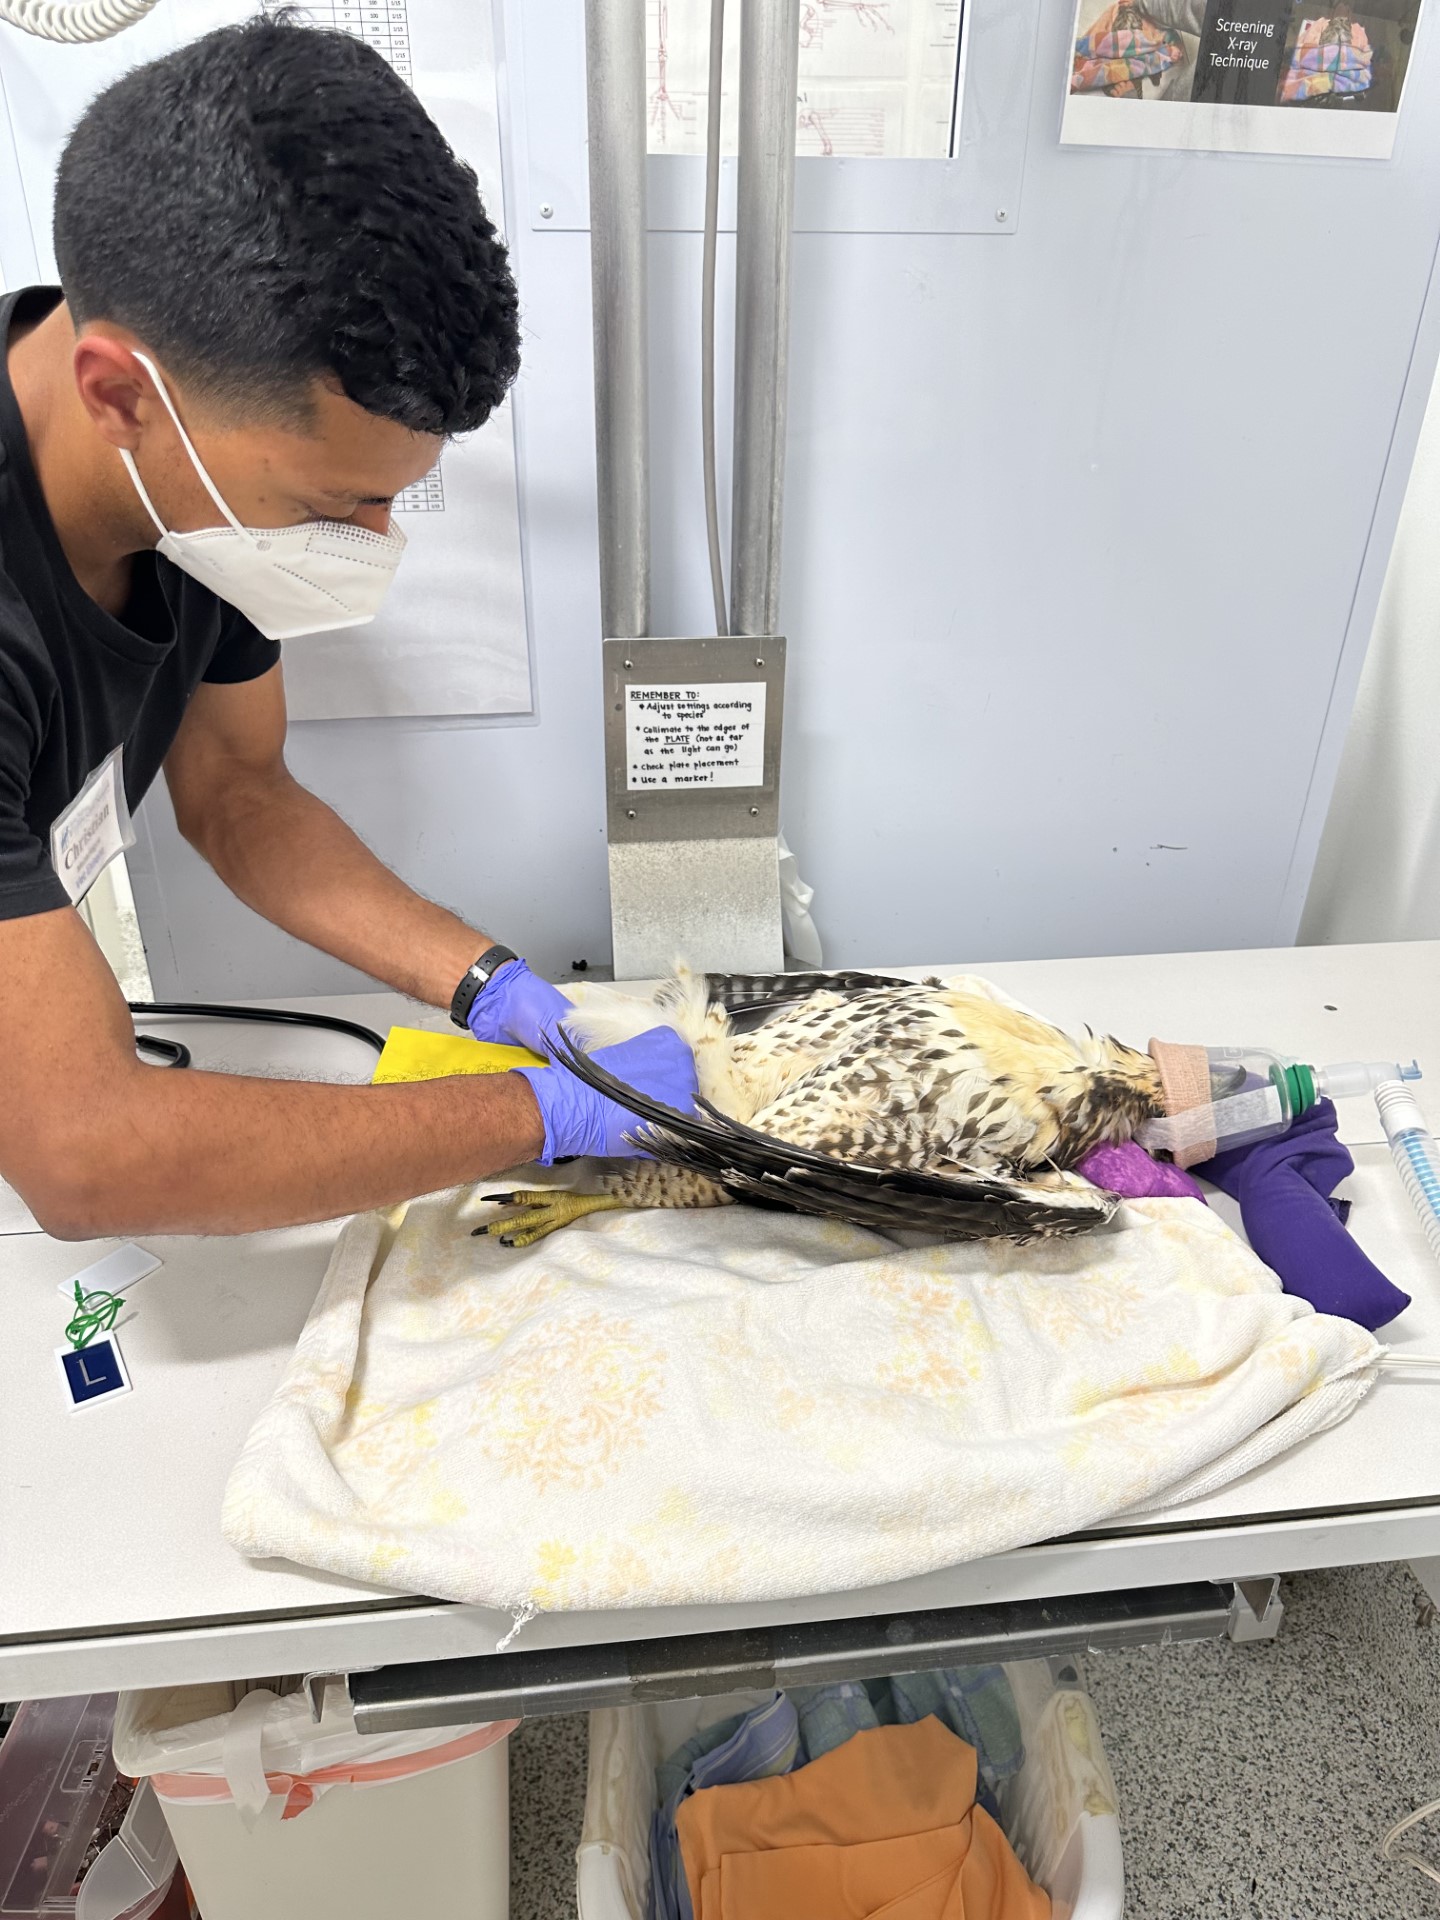 Christian Mazariegos cares for an injured Red-tailed Hawk.